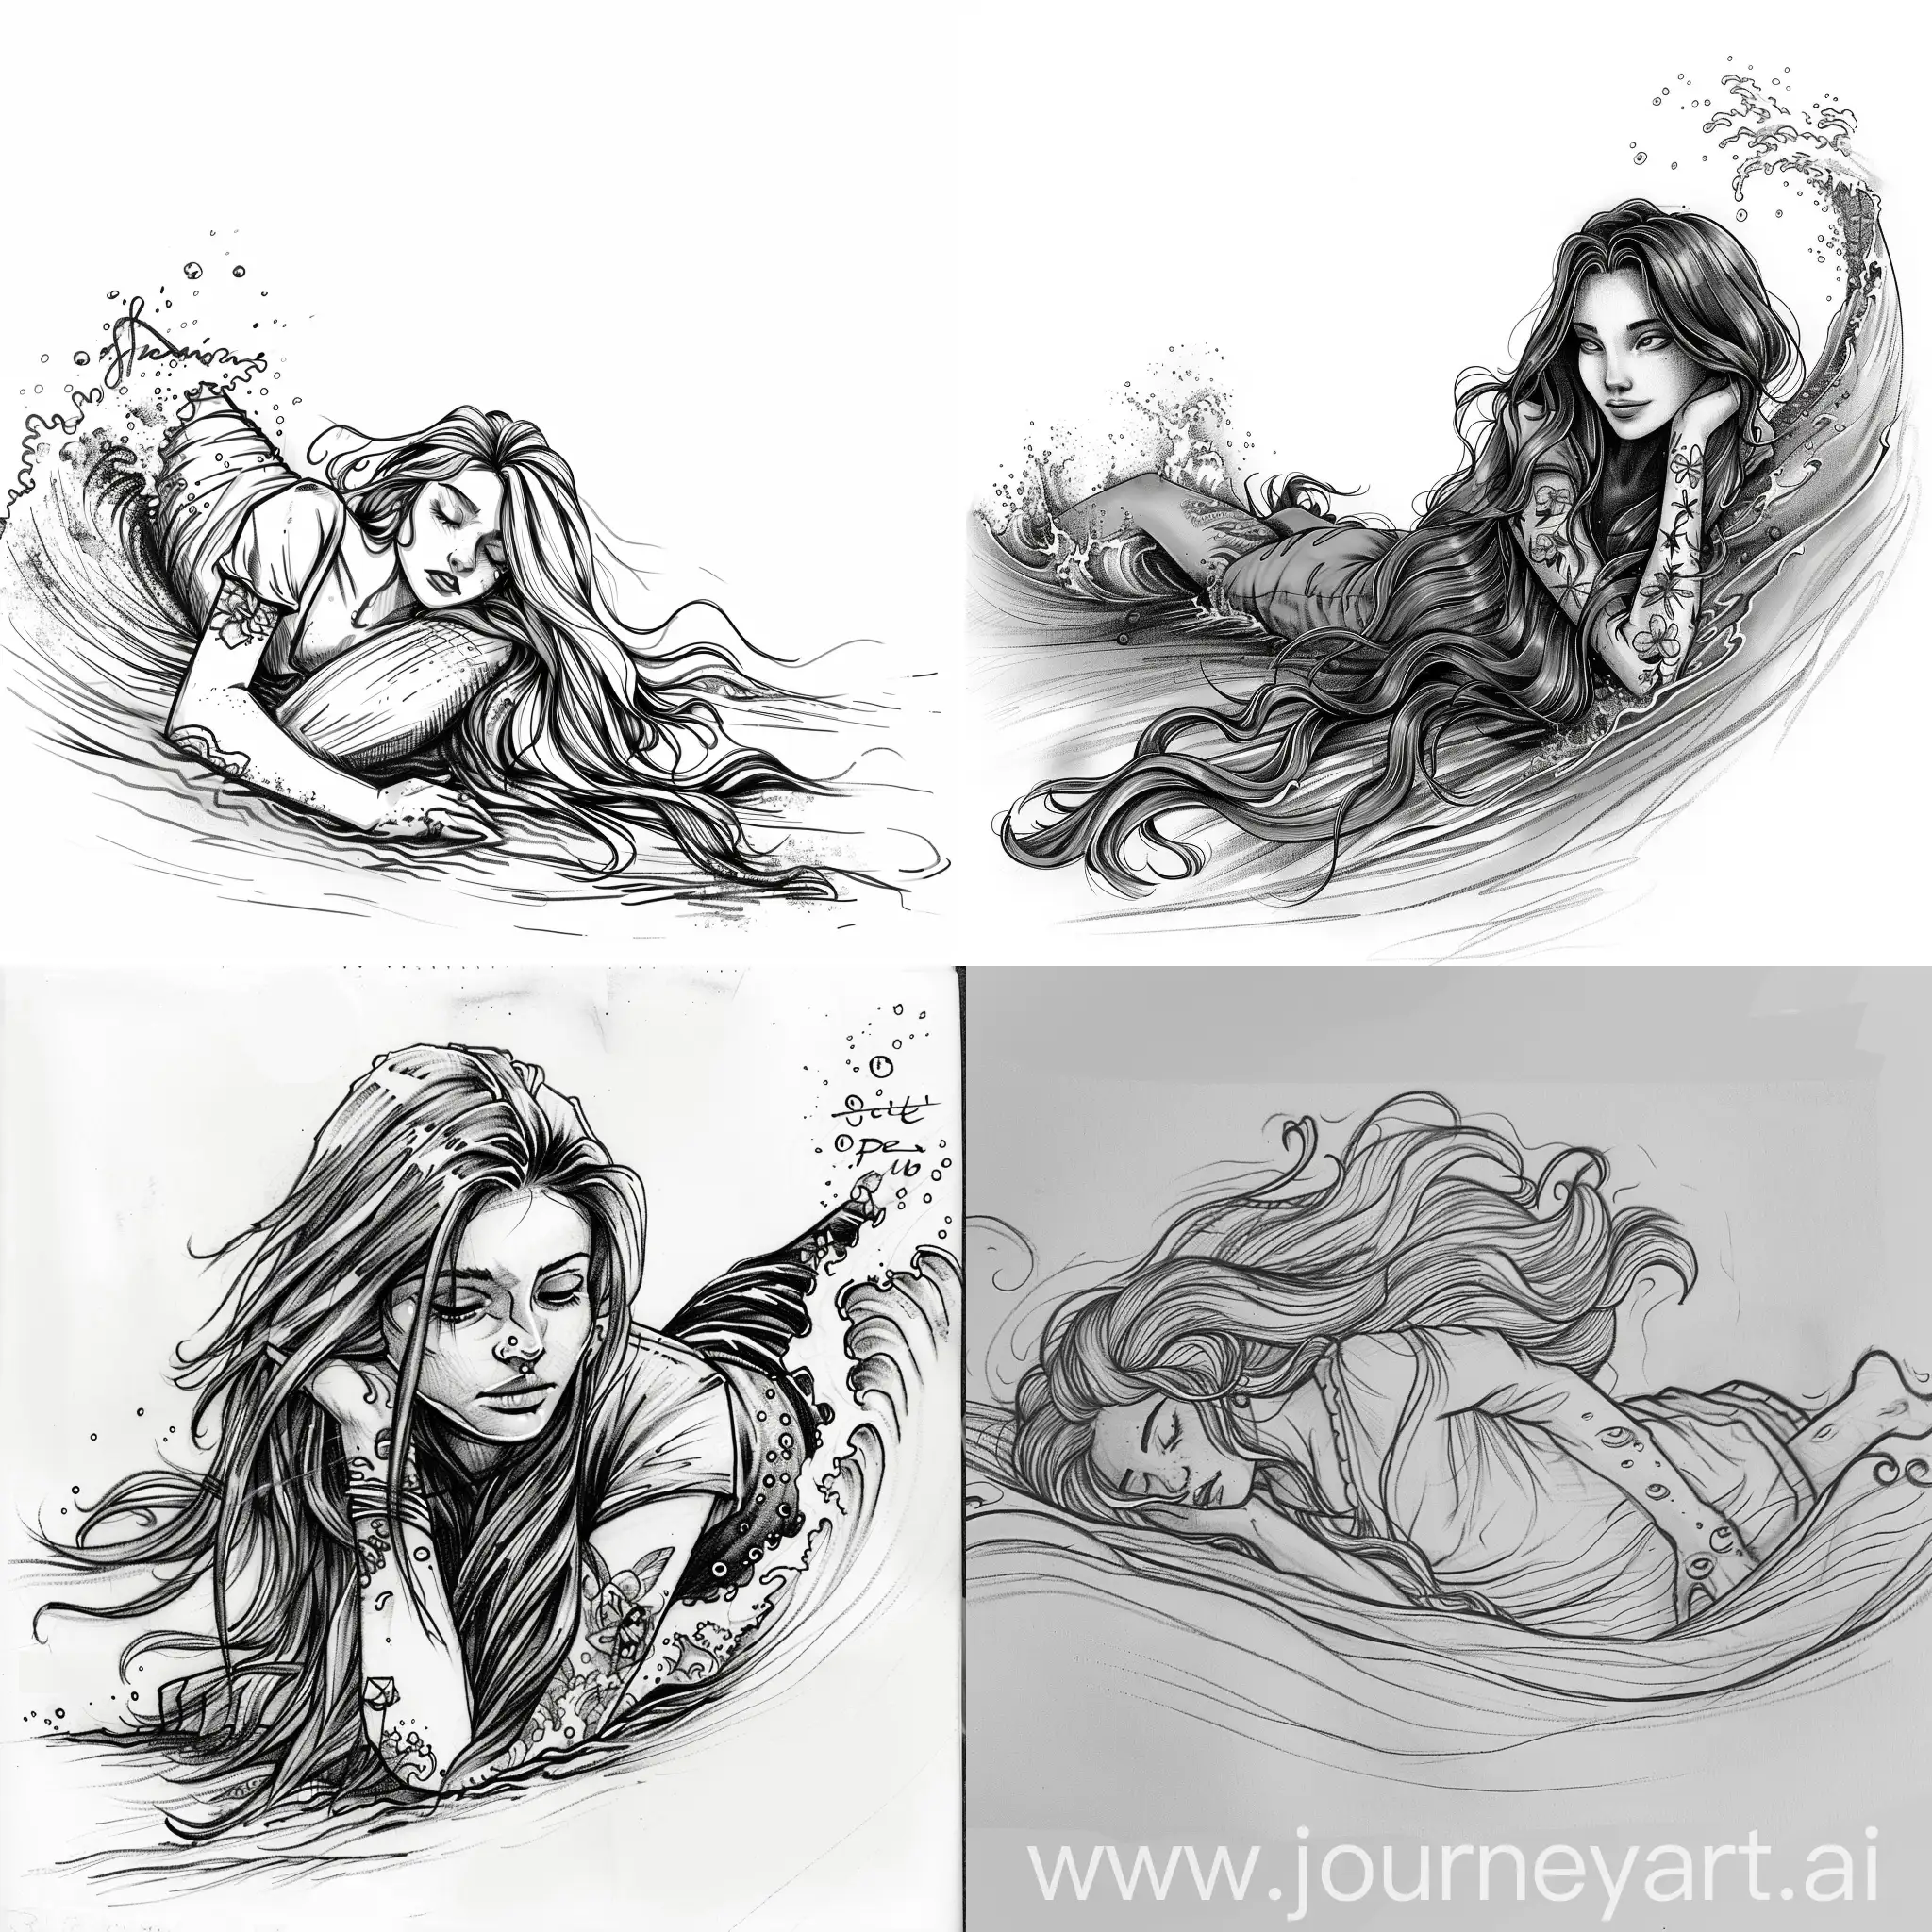 Dreamy-Girl-with-Long-Hair-Sketch-Lying-on-Wave